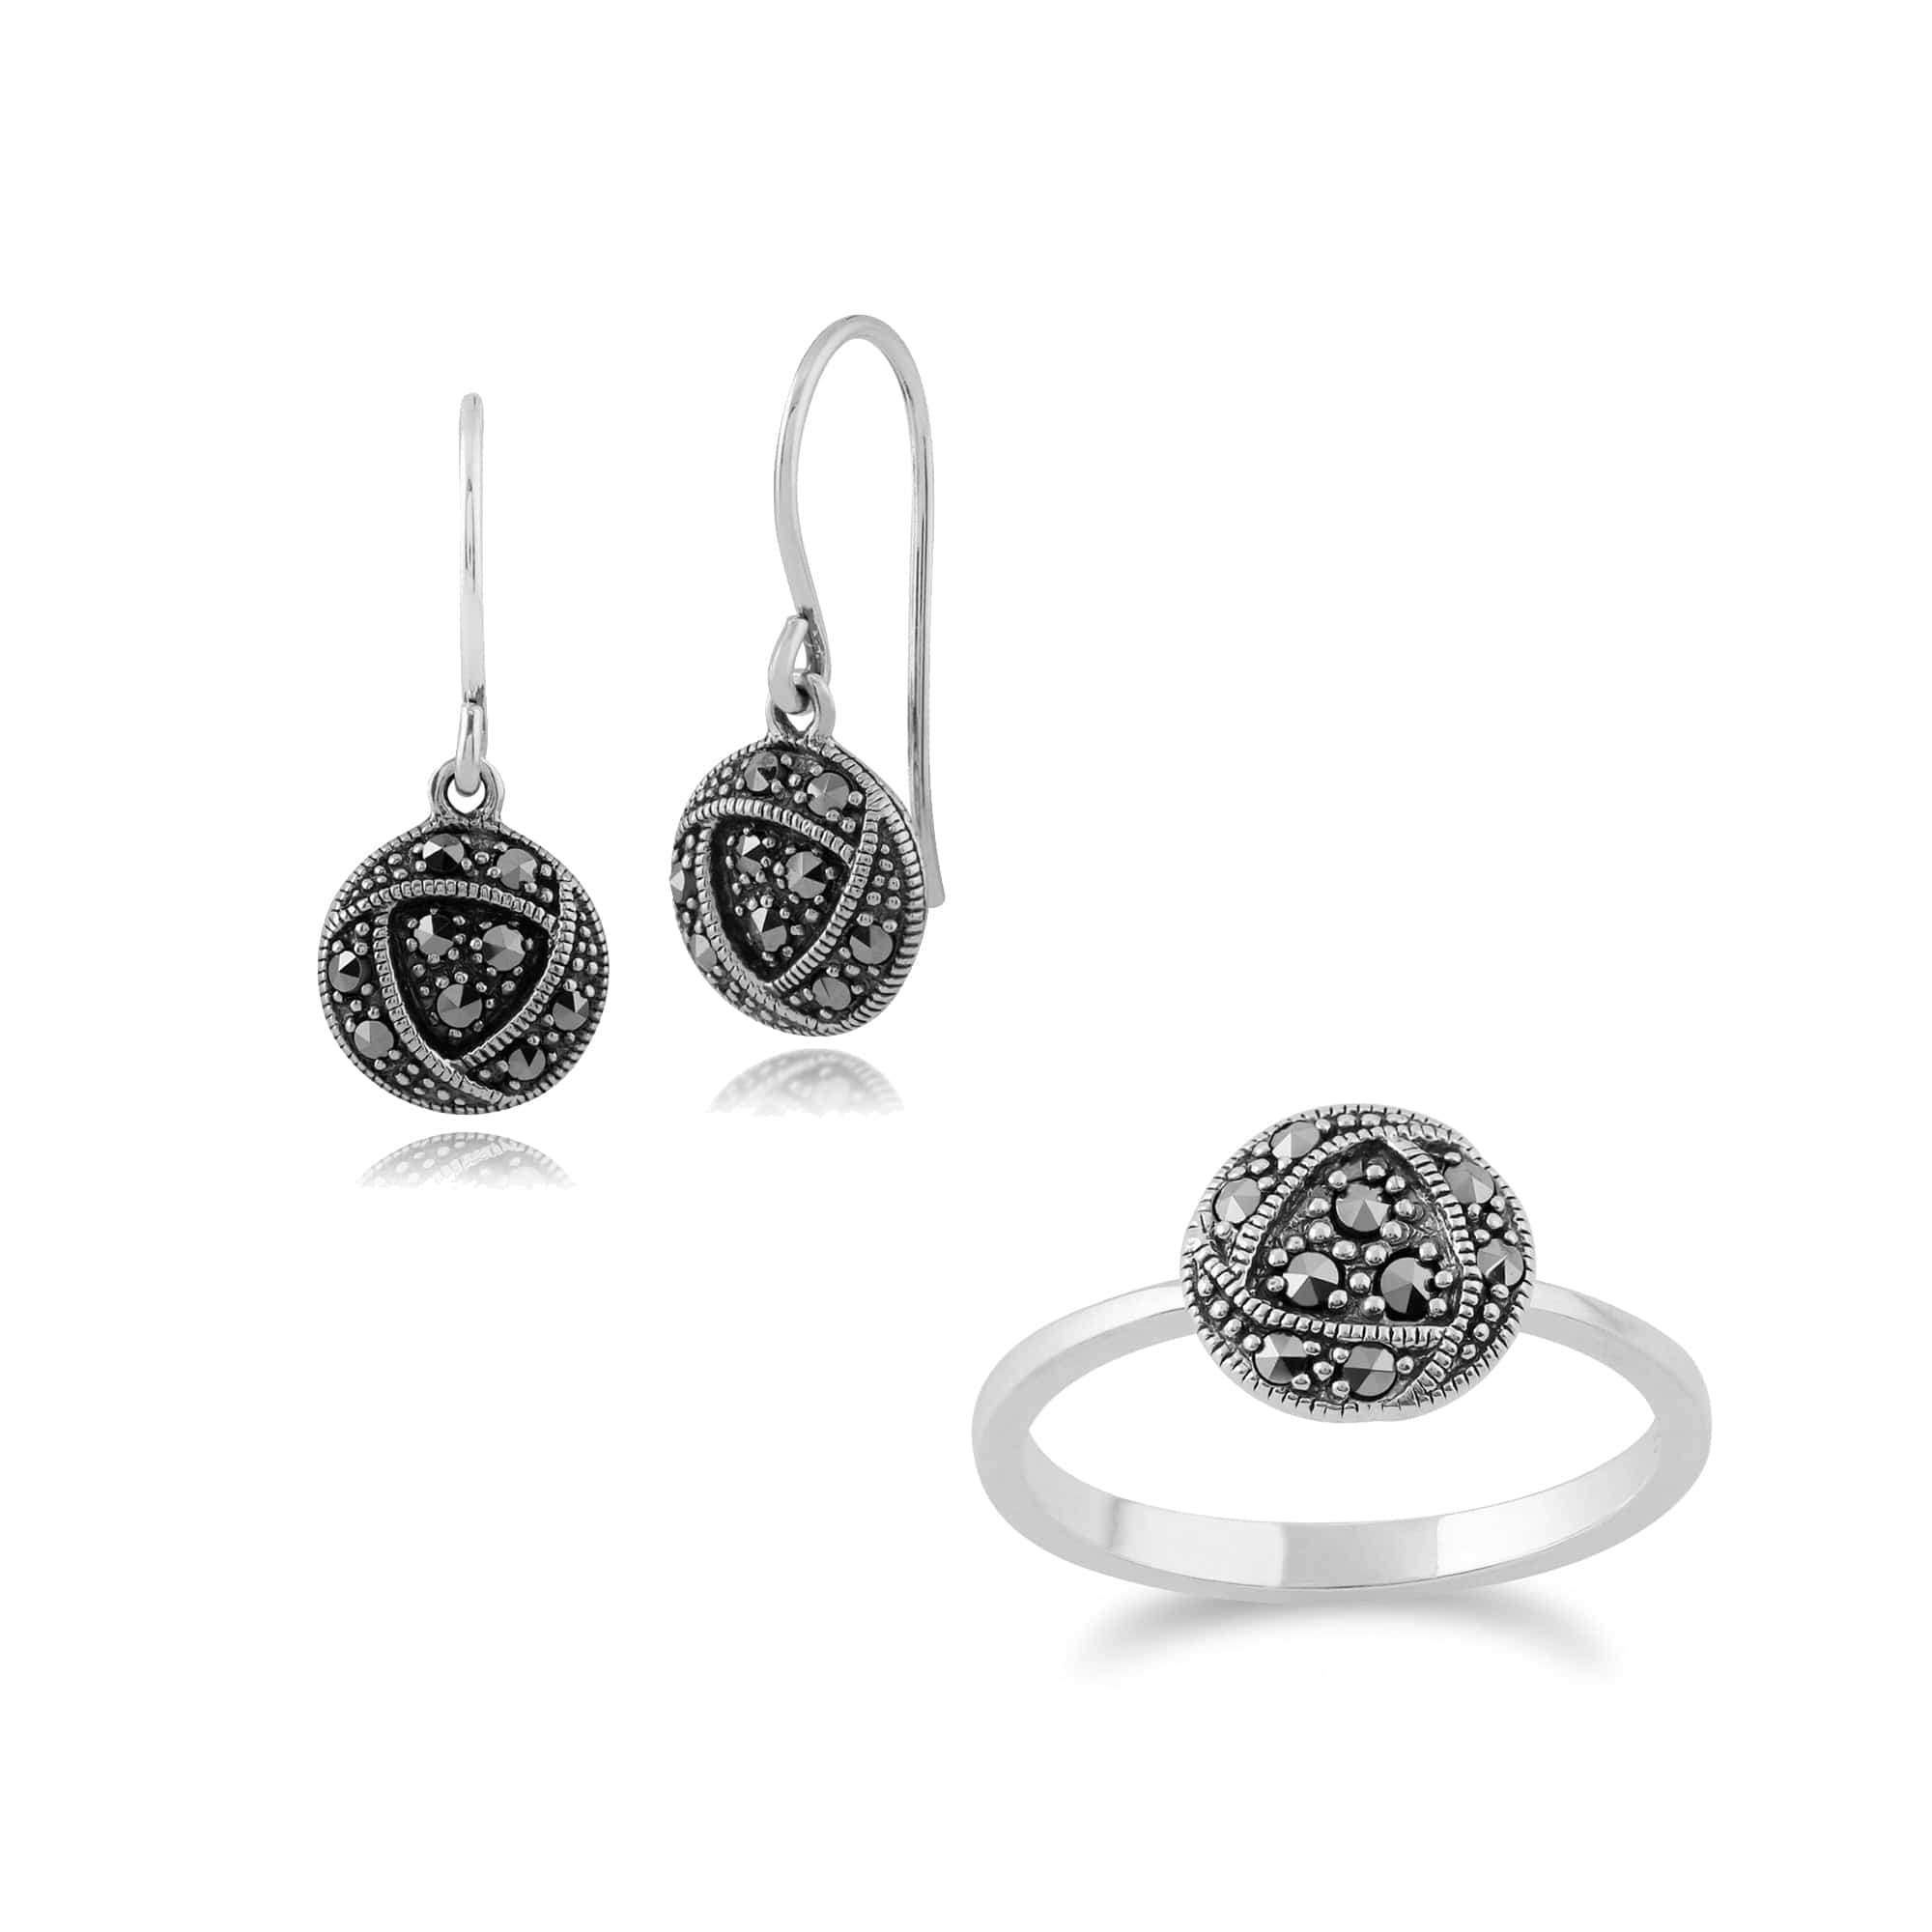 214E840901925-214R591301925 Rennie Mackintosh Inspired Round Marcasite Glasgow Rose Drop Earrings & Ring Set in 925 Sterling Silver 1